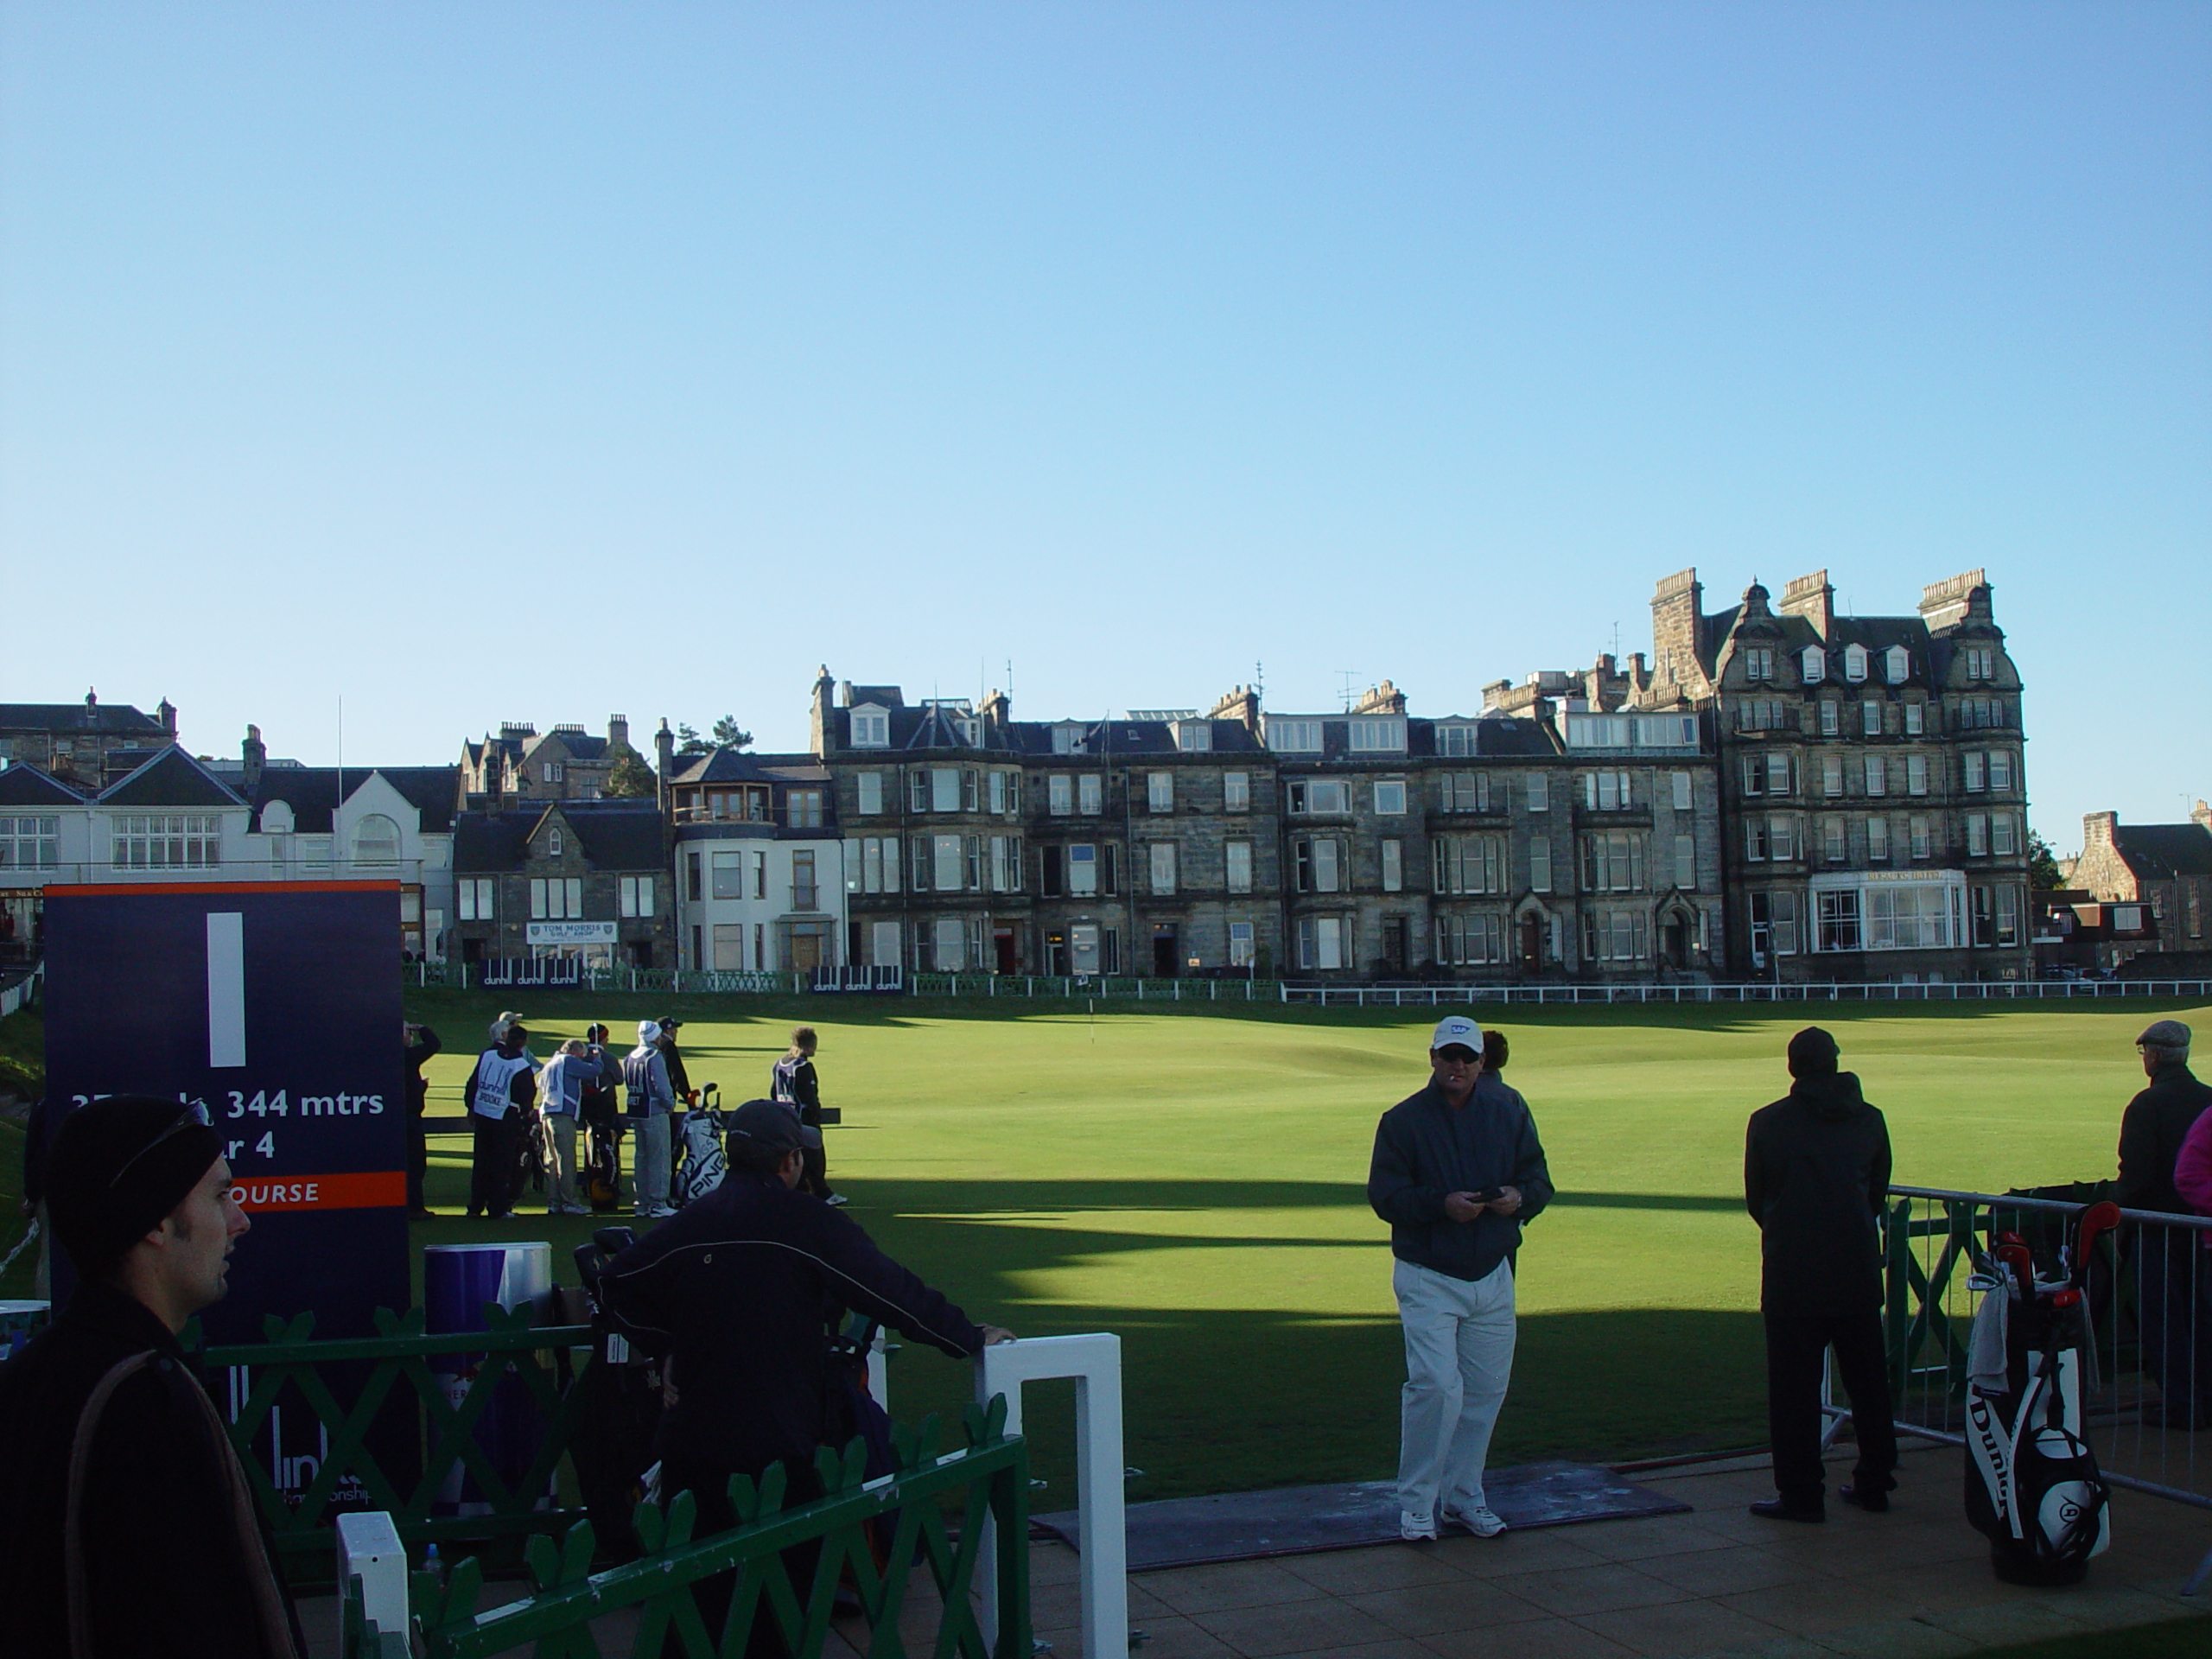 Europe Trip 2005 - Scotland Day 6 (St. Andrews: Old Course, Ahmad Rashad, Dunhill Links, St. Andrews Cathedral)